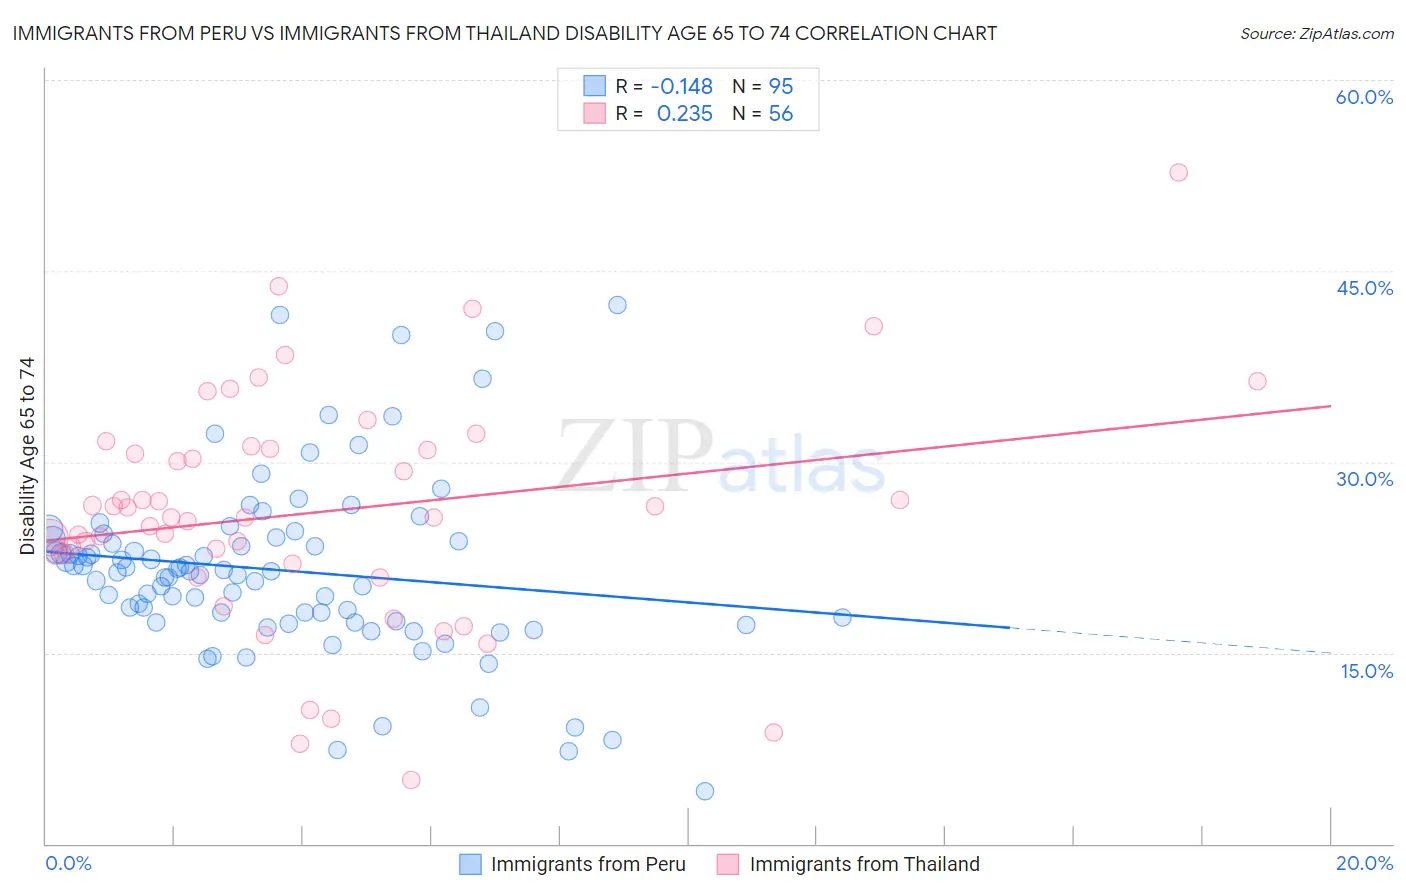 Immigrants from Peru vs Immigrants from Thailand Disability Age 65 to 74